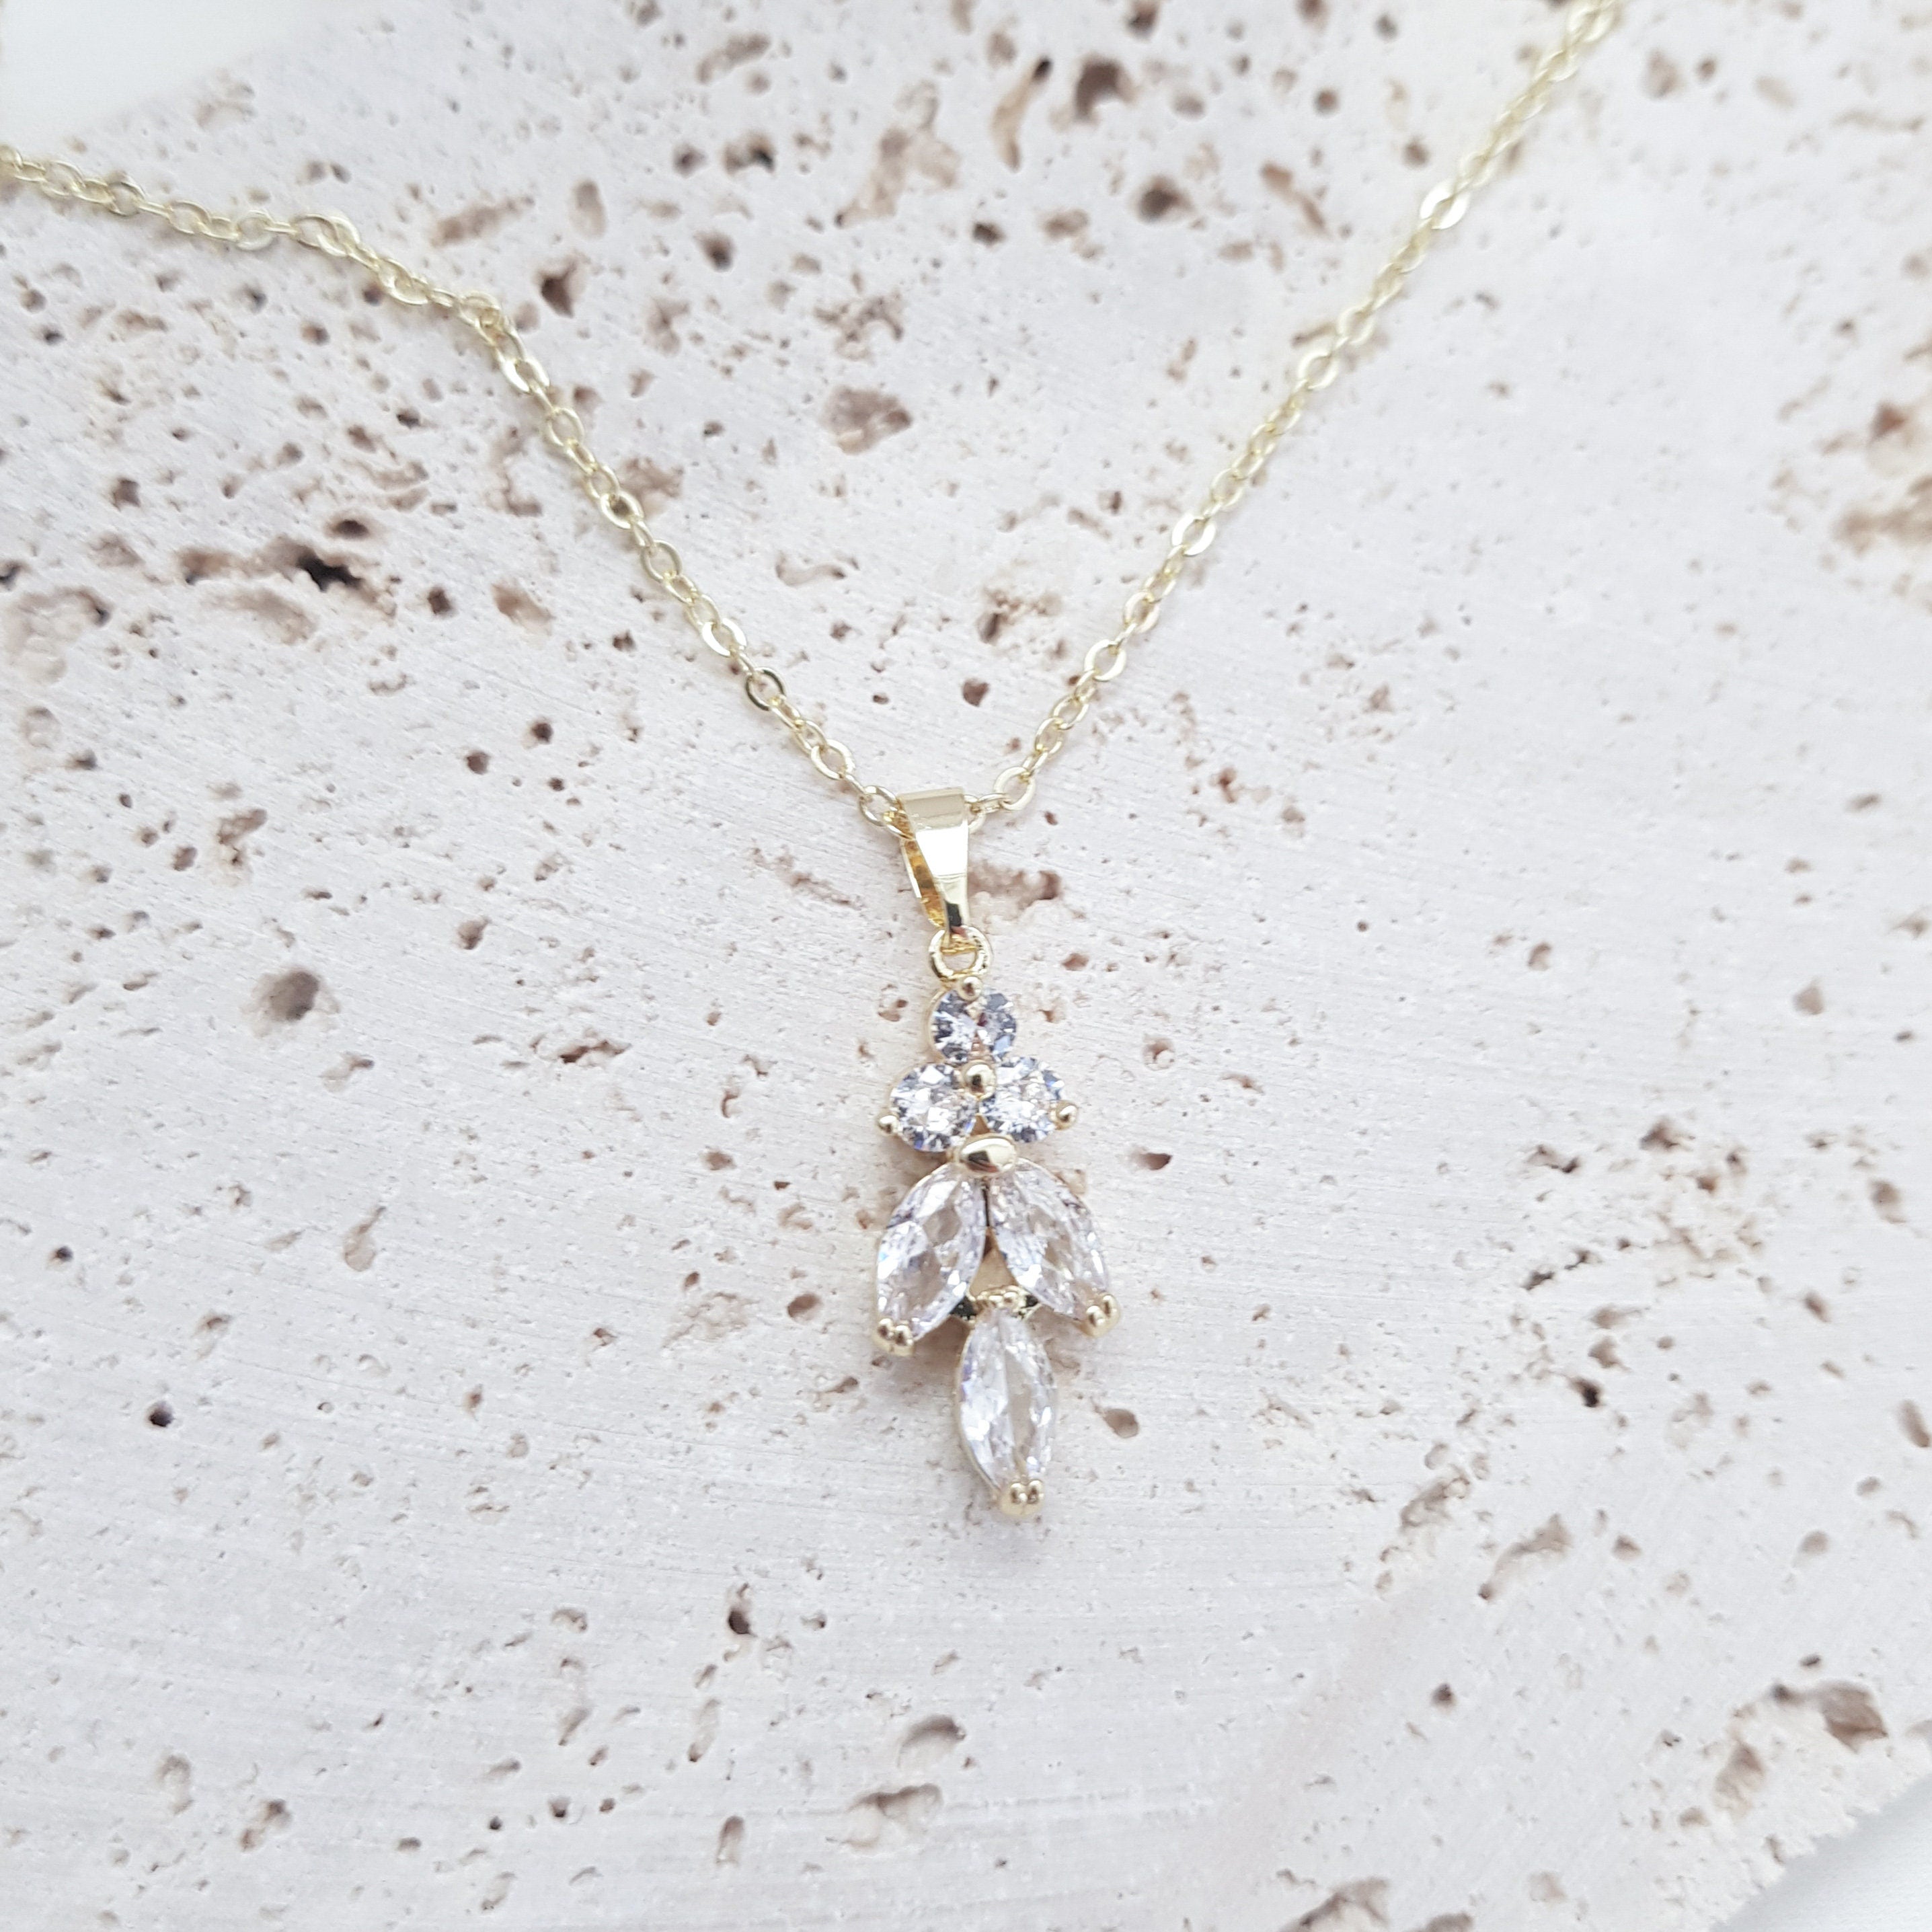 Bridal Necklace, Vintage Style Necklace, Crystal Bridal Necklace, Gold Necklace, Wedding Necklace, Bridesmaid Gift, Bridal Jewellery